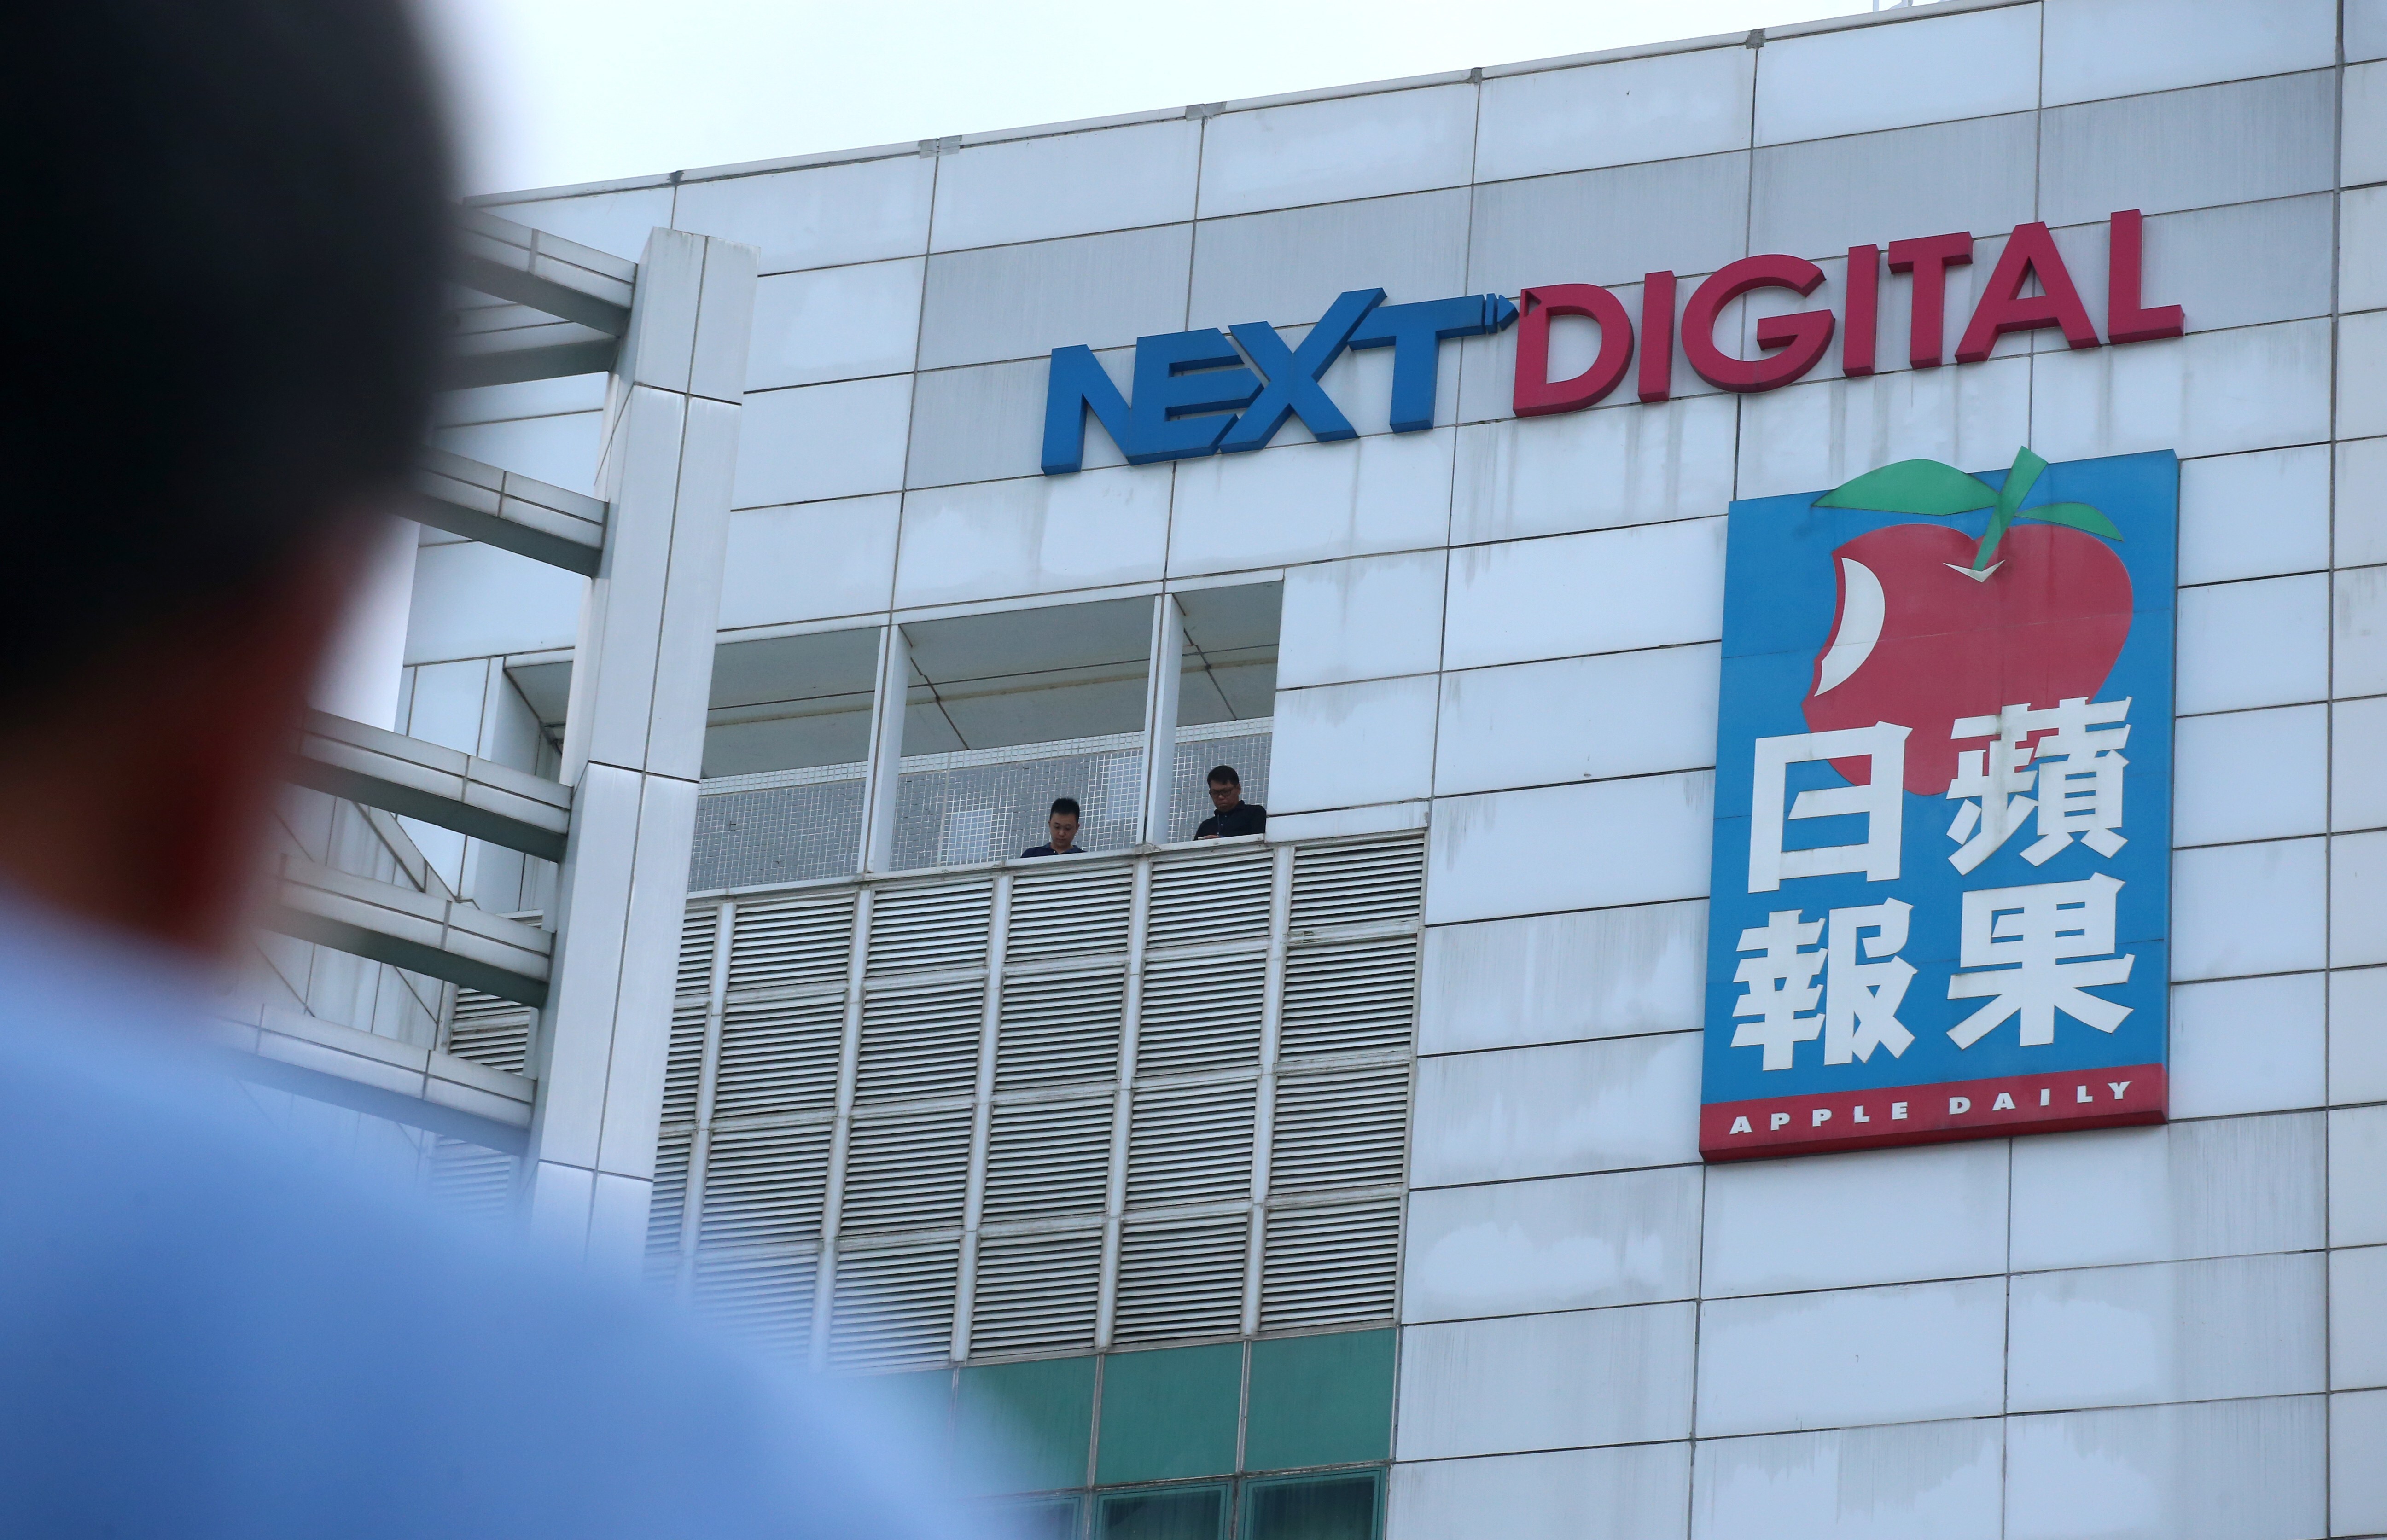 Next Digital’s offices in Tseung Kwan O. The sale will improve its overall cash position, the company said. Photo: David Wong